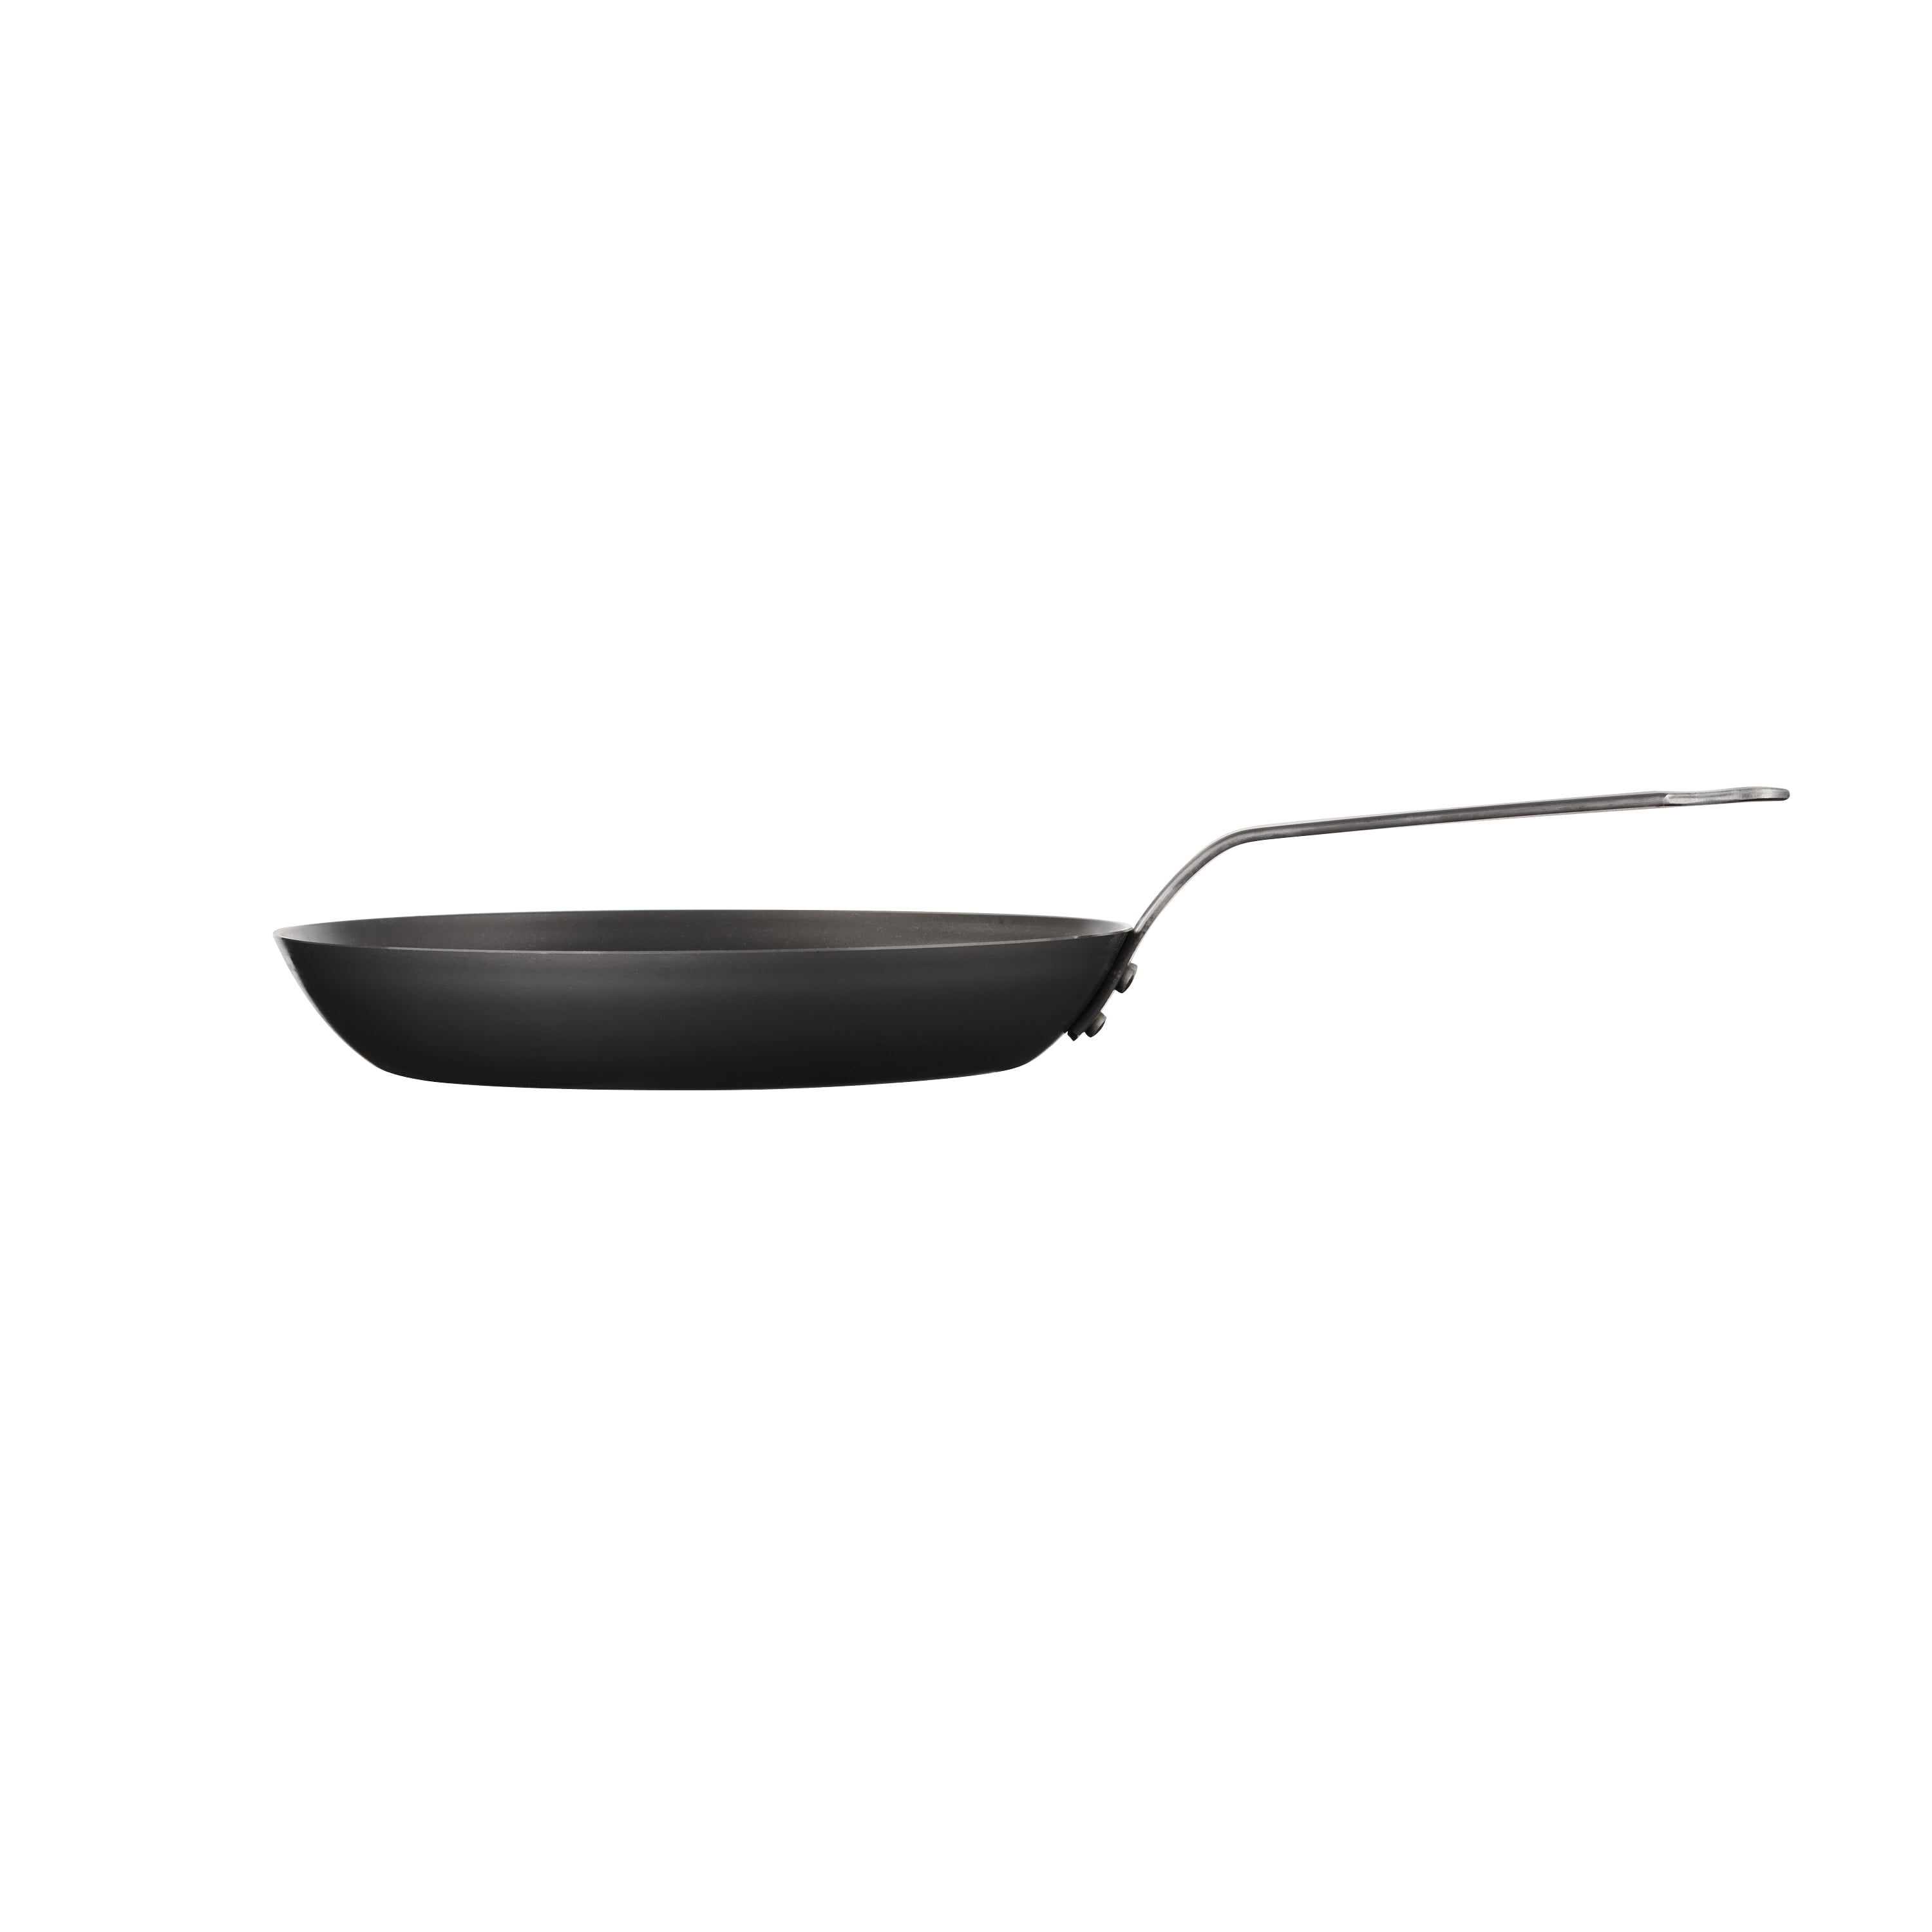 Tramontina 12 in Carbon Steel Fry Pan – with Silicone Grip, 12